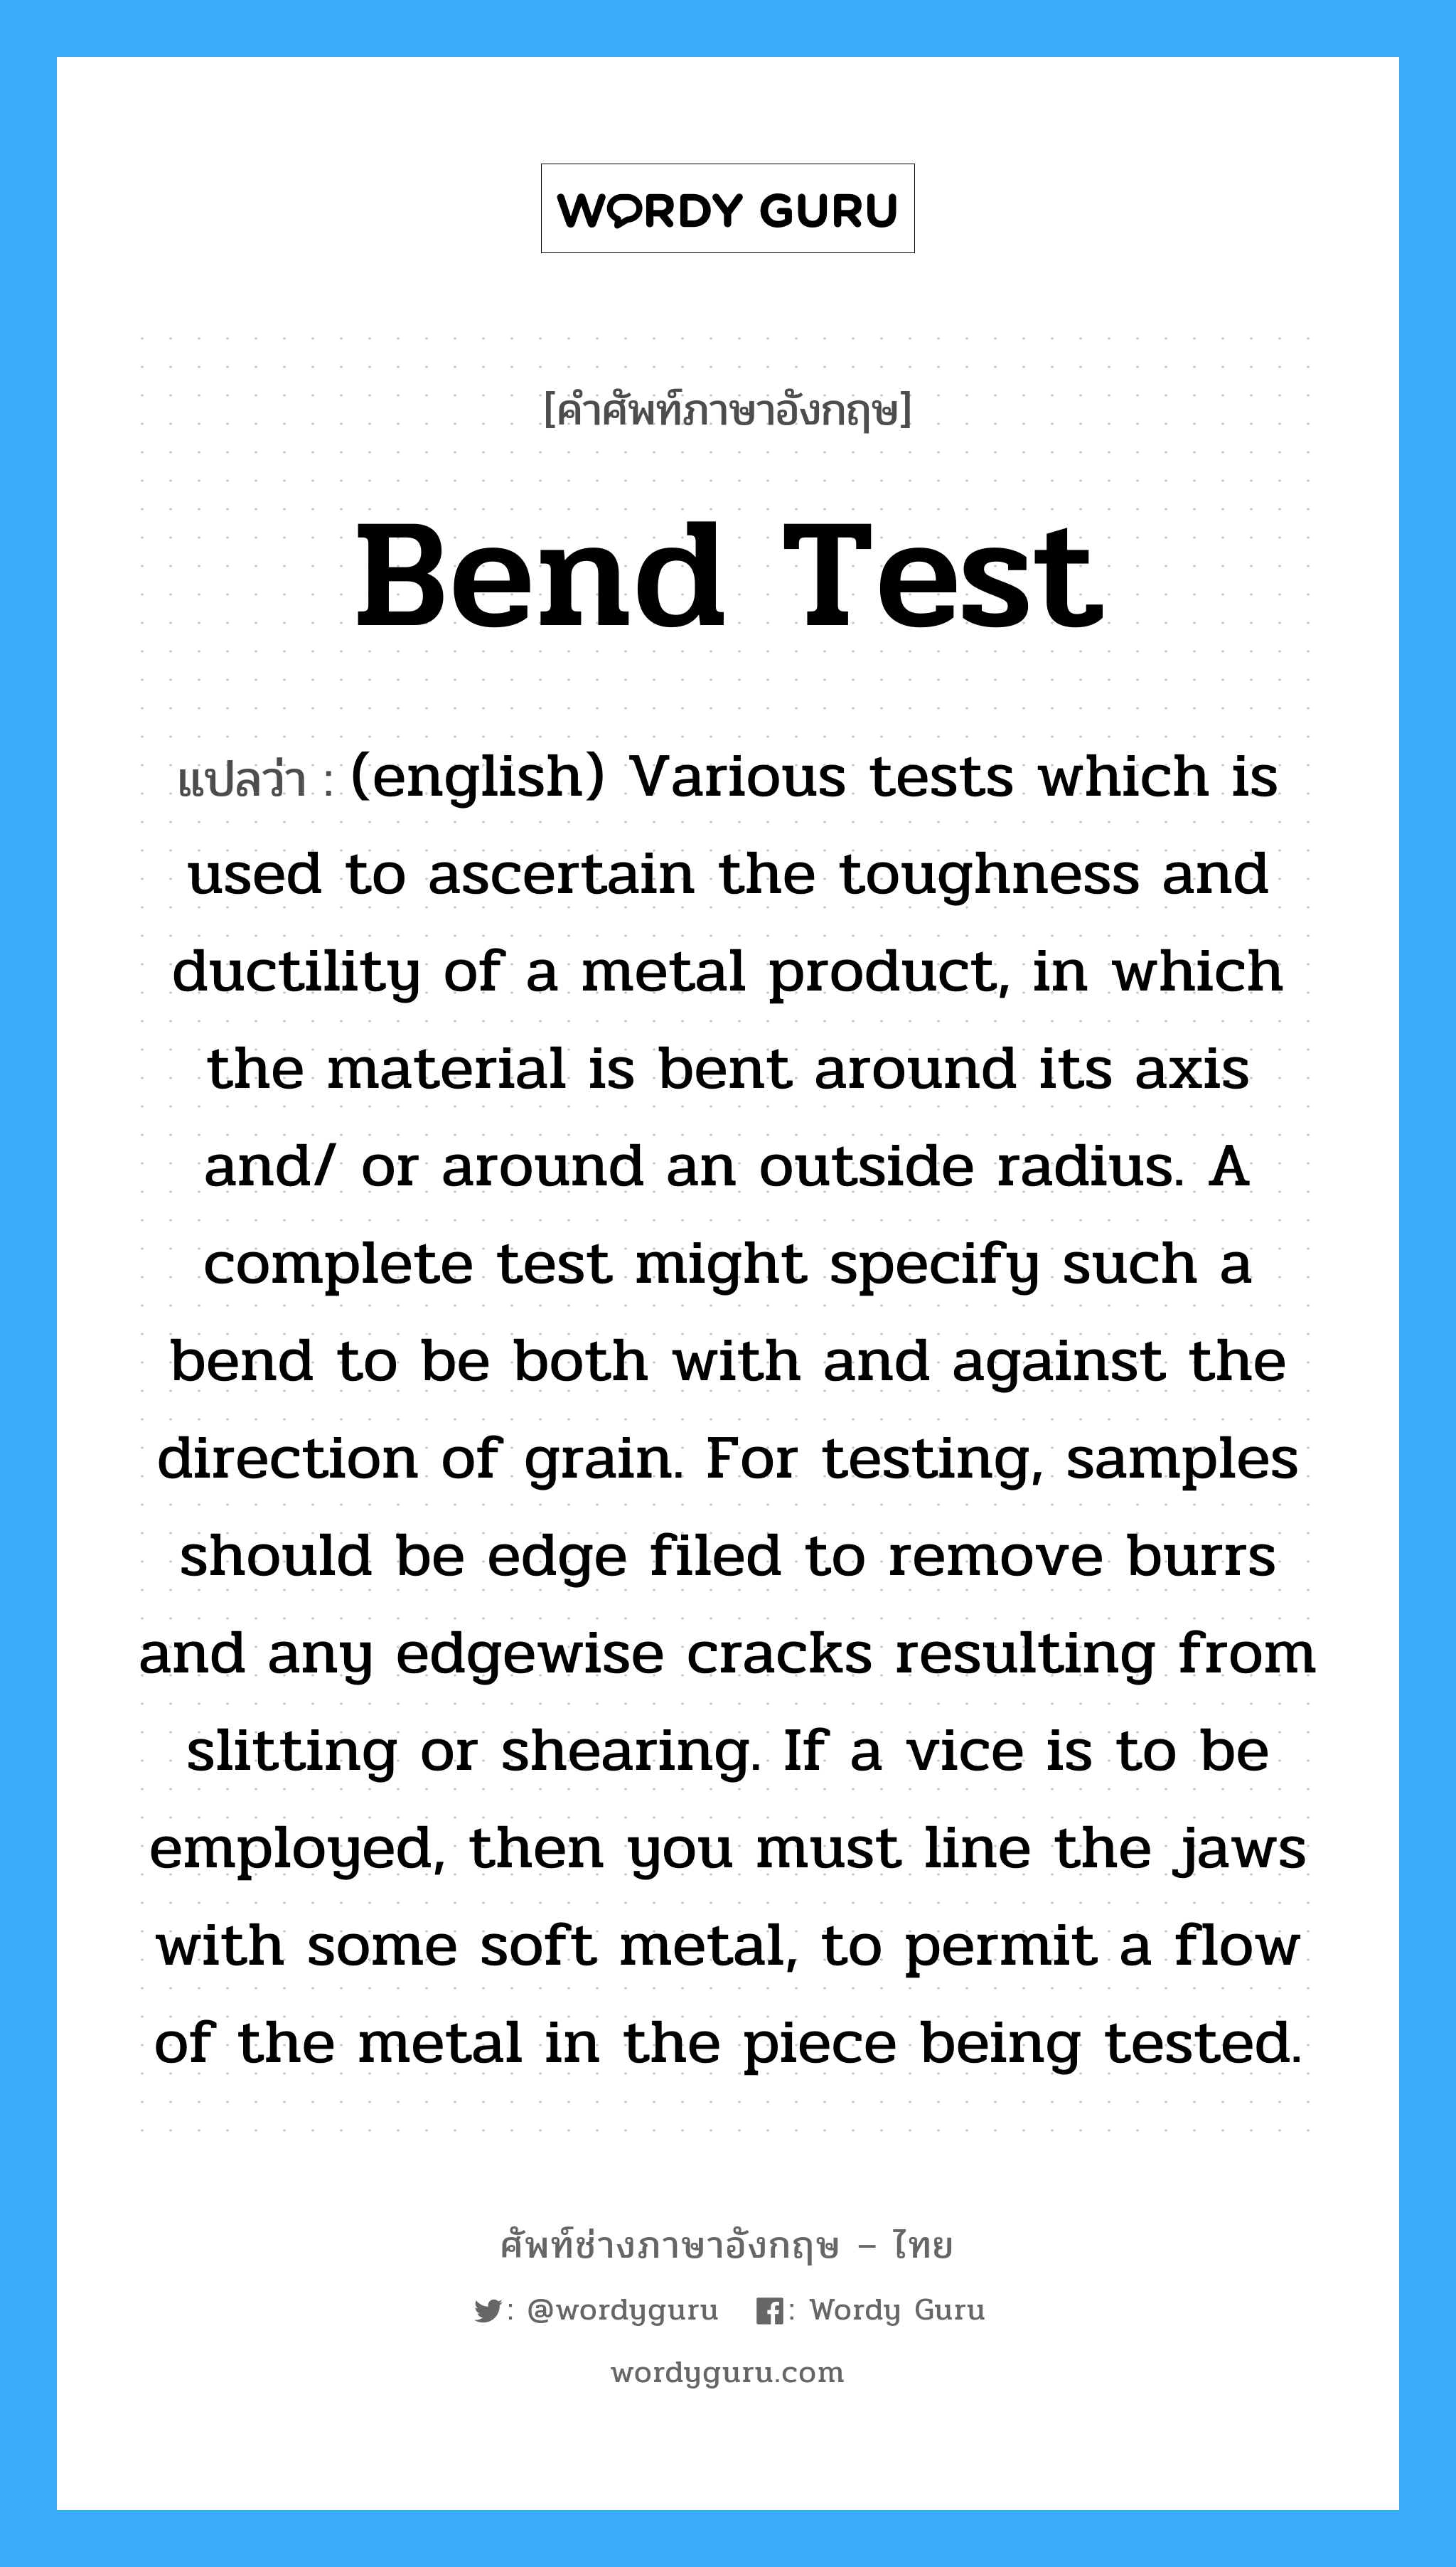 Bend Test แปลว่า?, คำศัพท์ช่างภาษาอังกฤษ - ไทย Bend Test คำศัพท์ภาษาอังกฤษ Bend Test แปลว่า (english) Various tests which is used to ascertain the toughness and ductility of a metal product, in which the material is bent around its axis and/ or around an outside radius. A complete test might specify such a bend to be both with and against the direction of grain. For testing, samples should be edge filed to remove burrs and any edgewise cracks resulting from slitting or shearing. If a vice is to be employed, then you must line the jaws with some soft metal, to permit a flow of the metal in the piece being tested.